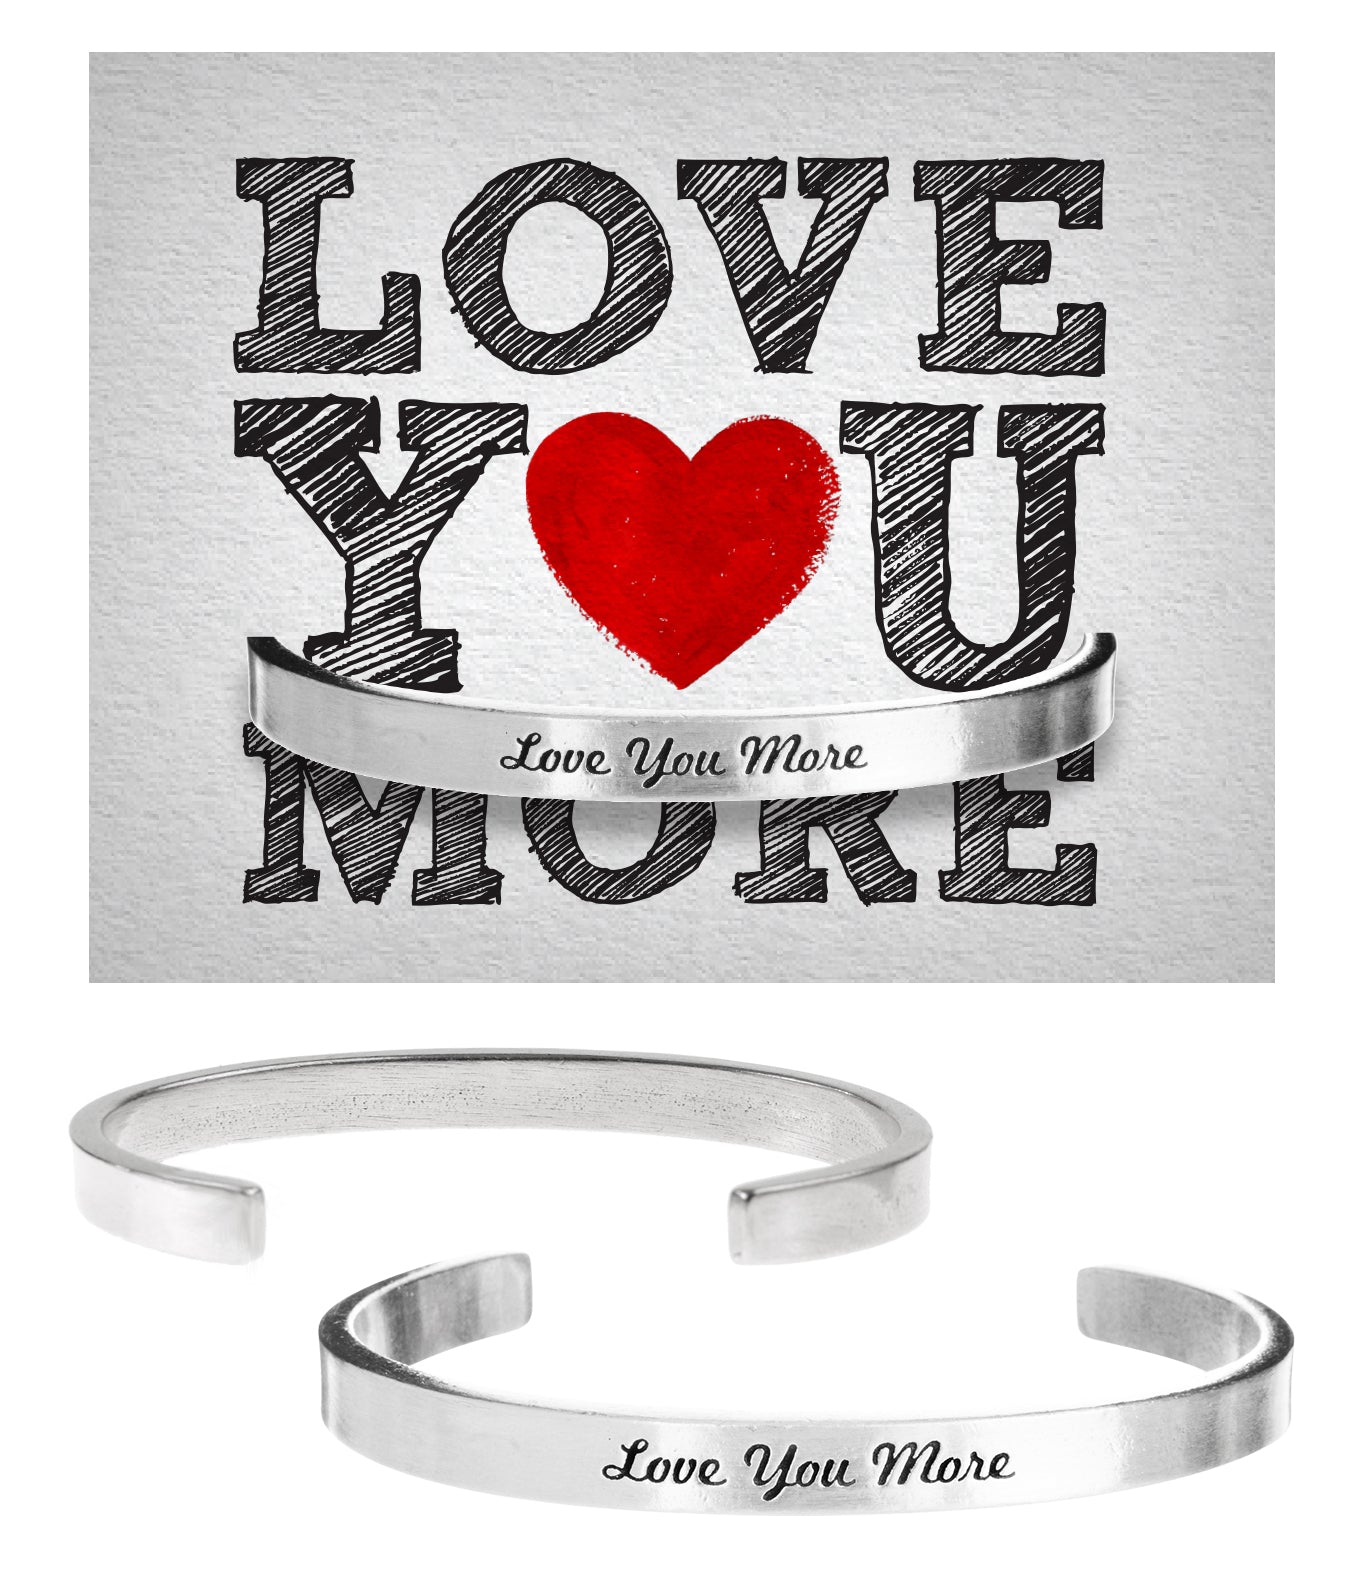 Love You More Quotable Cuff Bracelet with backer card